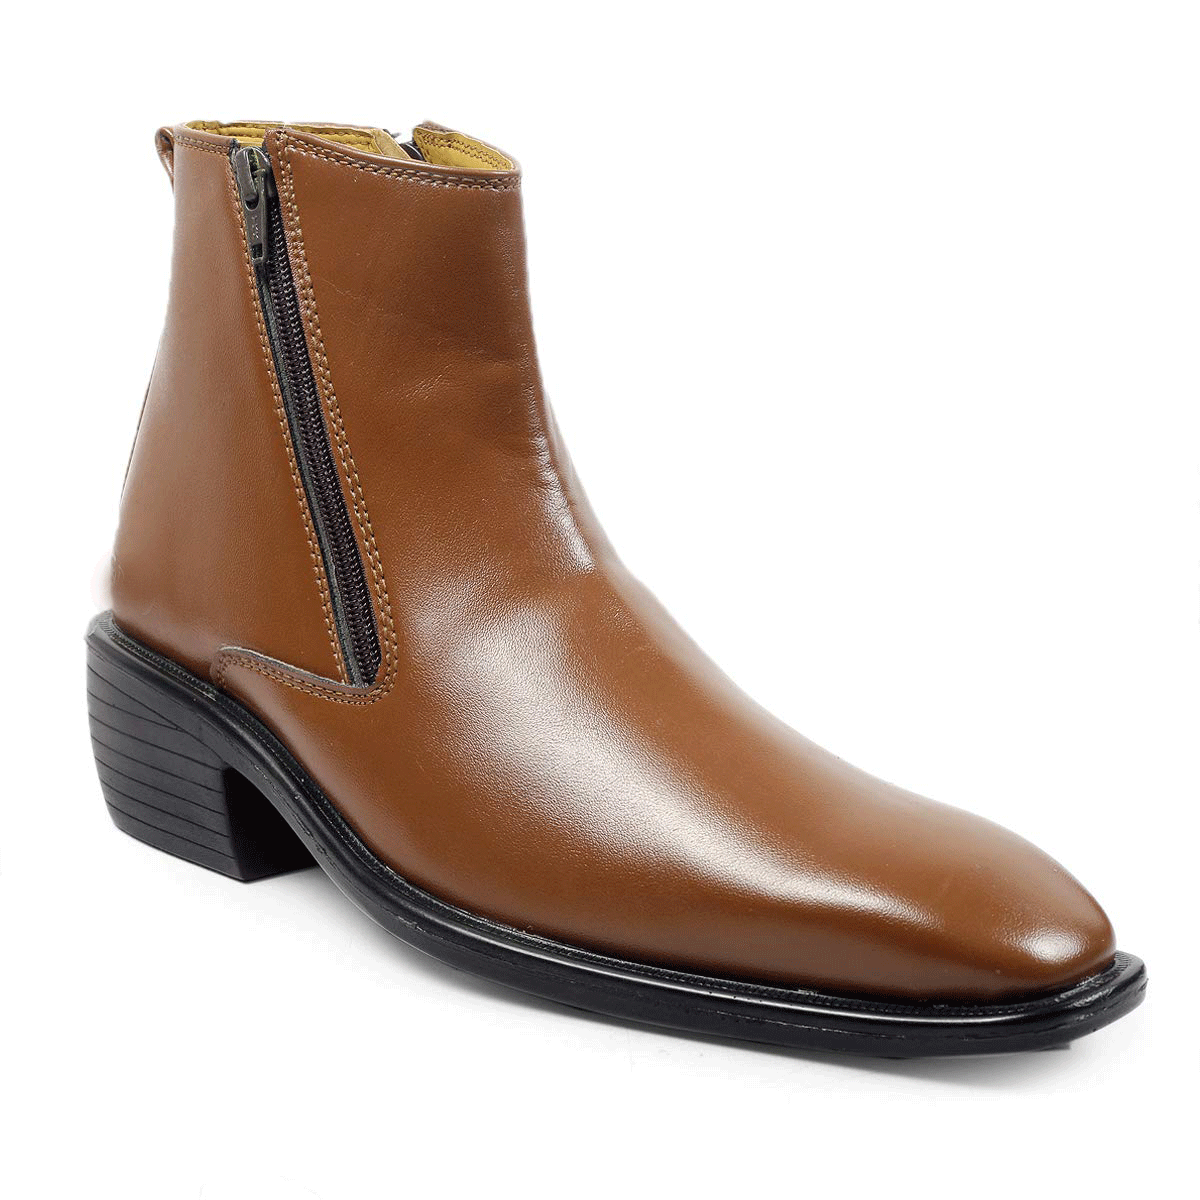 New Arrival Tan Casual Formal Zipper Ankle Boots For Men-JonasParamount